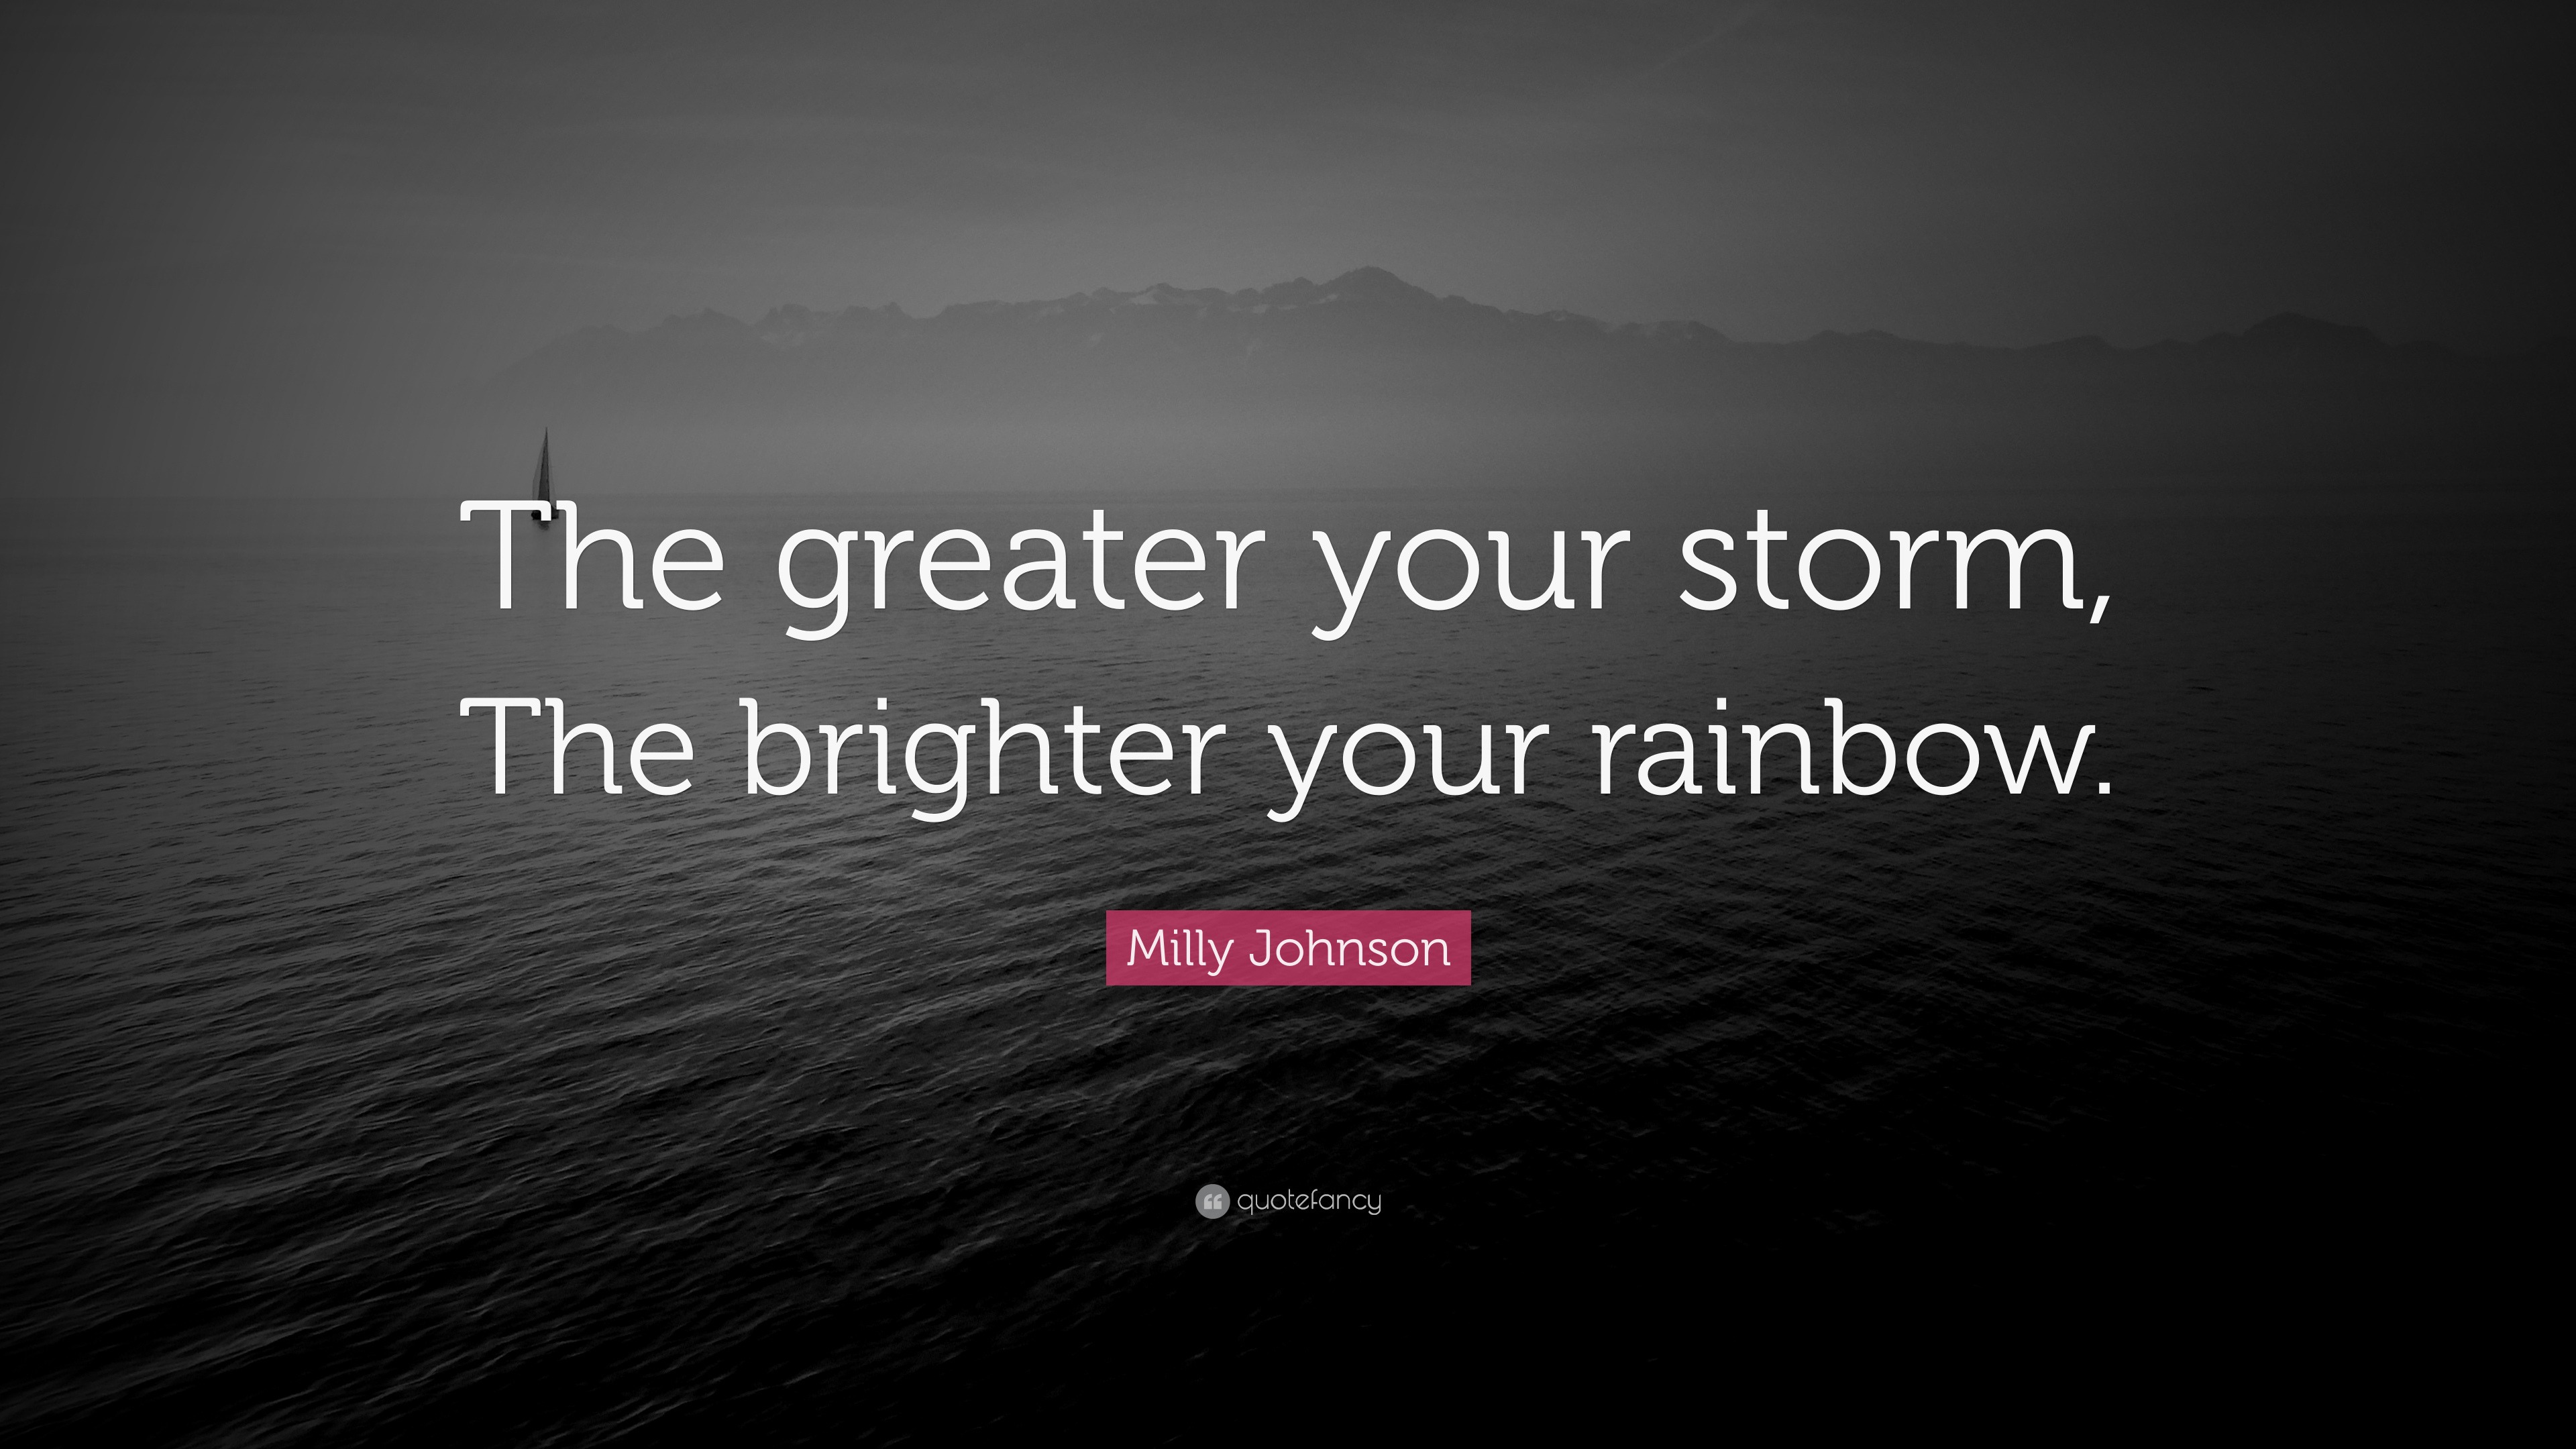 Milly Johnson Quote “the Greater Your Storm The Brighter Your Rainbow ”